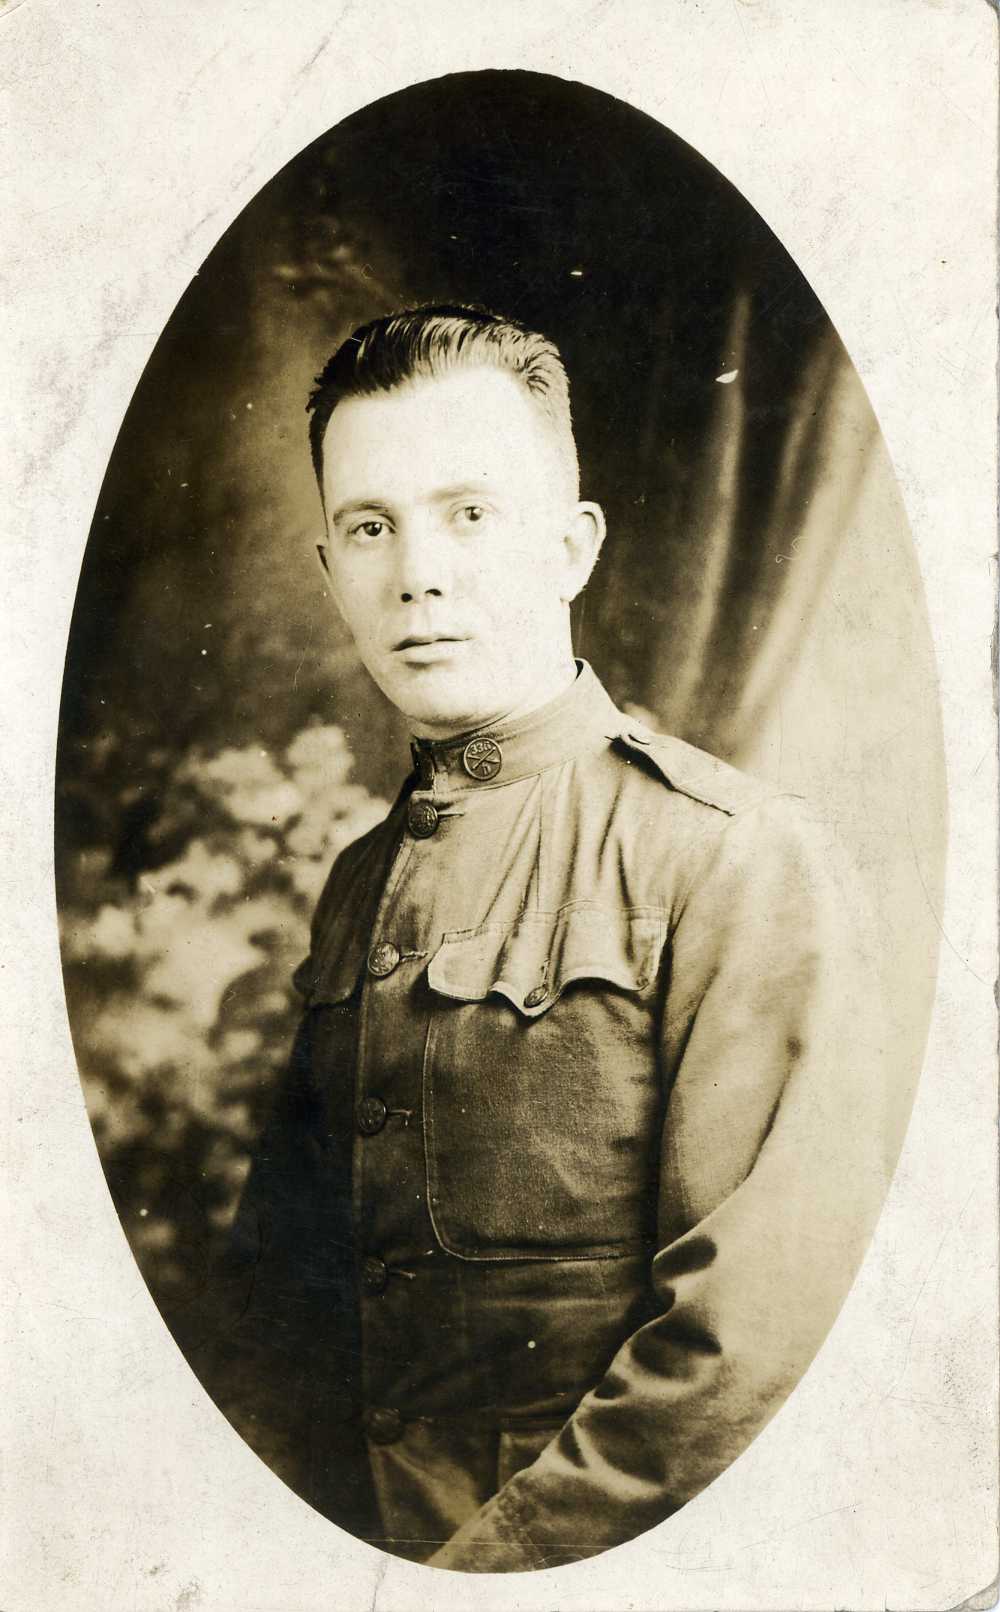 William R. Wetherall soldier